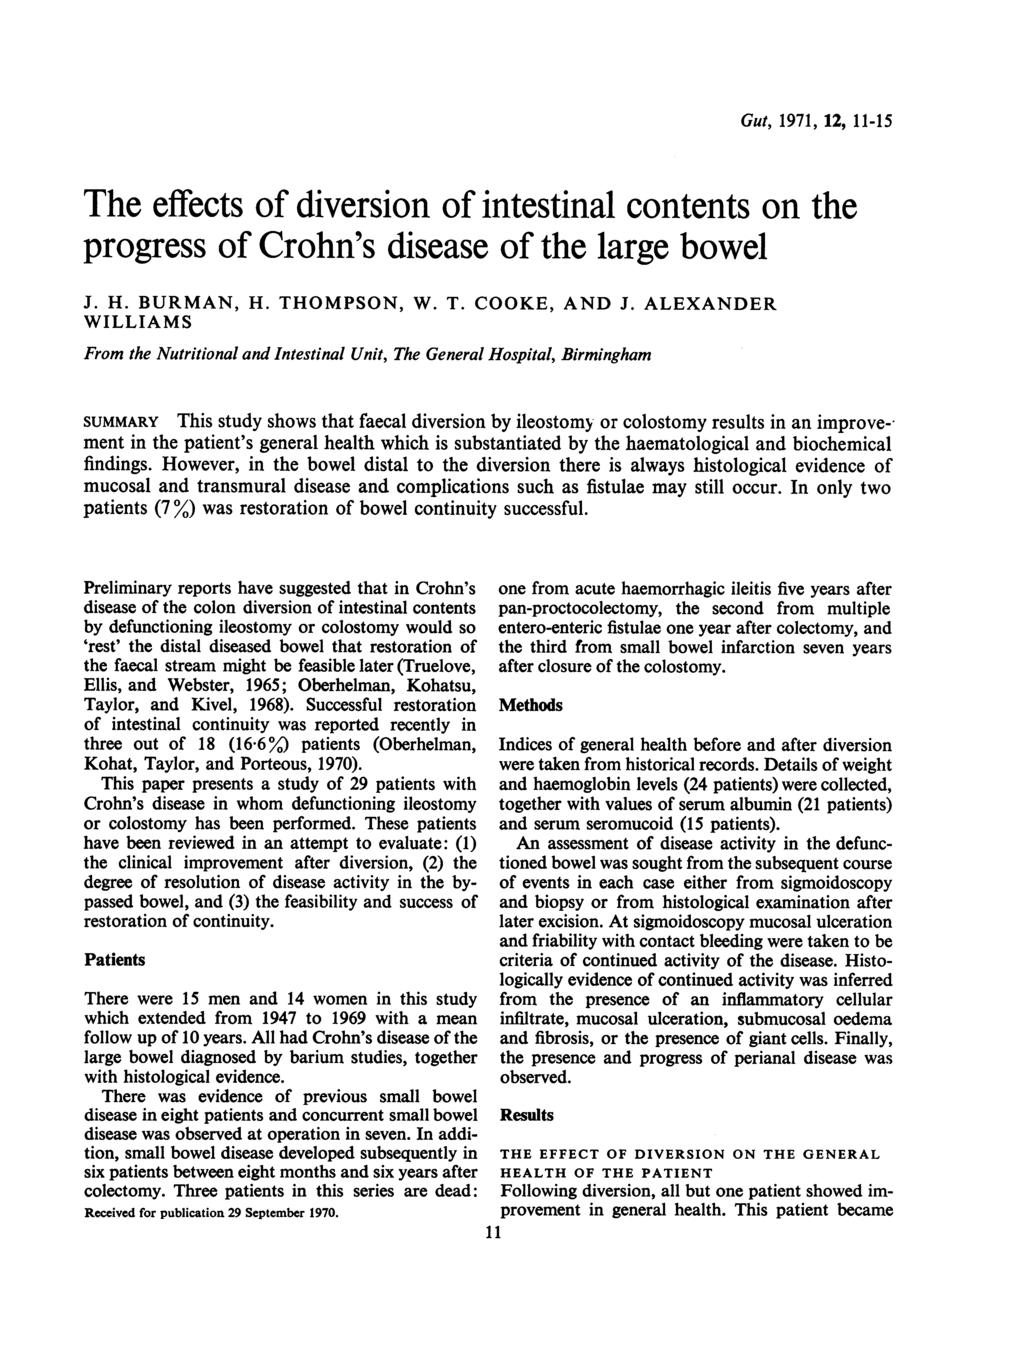 Gut, 1971, 12, 11-15 The effects of diversion of intestinl contents on the progress of Crohn's disese of the lrge owel J. H. BURMAN, H. THOMPSON, W. T. COOKE, AND J.